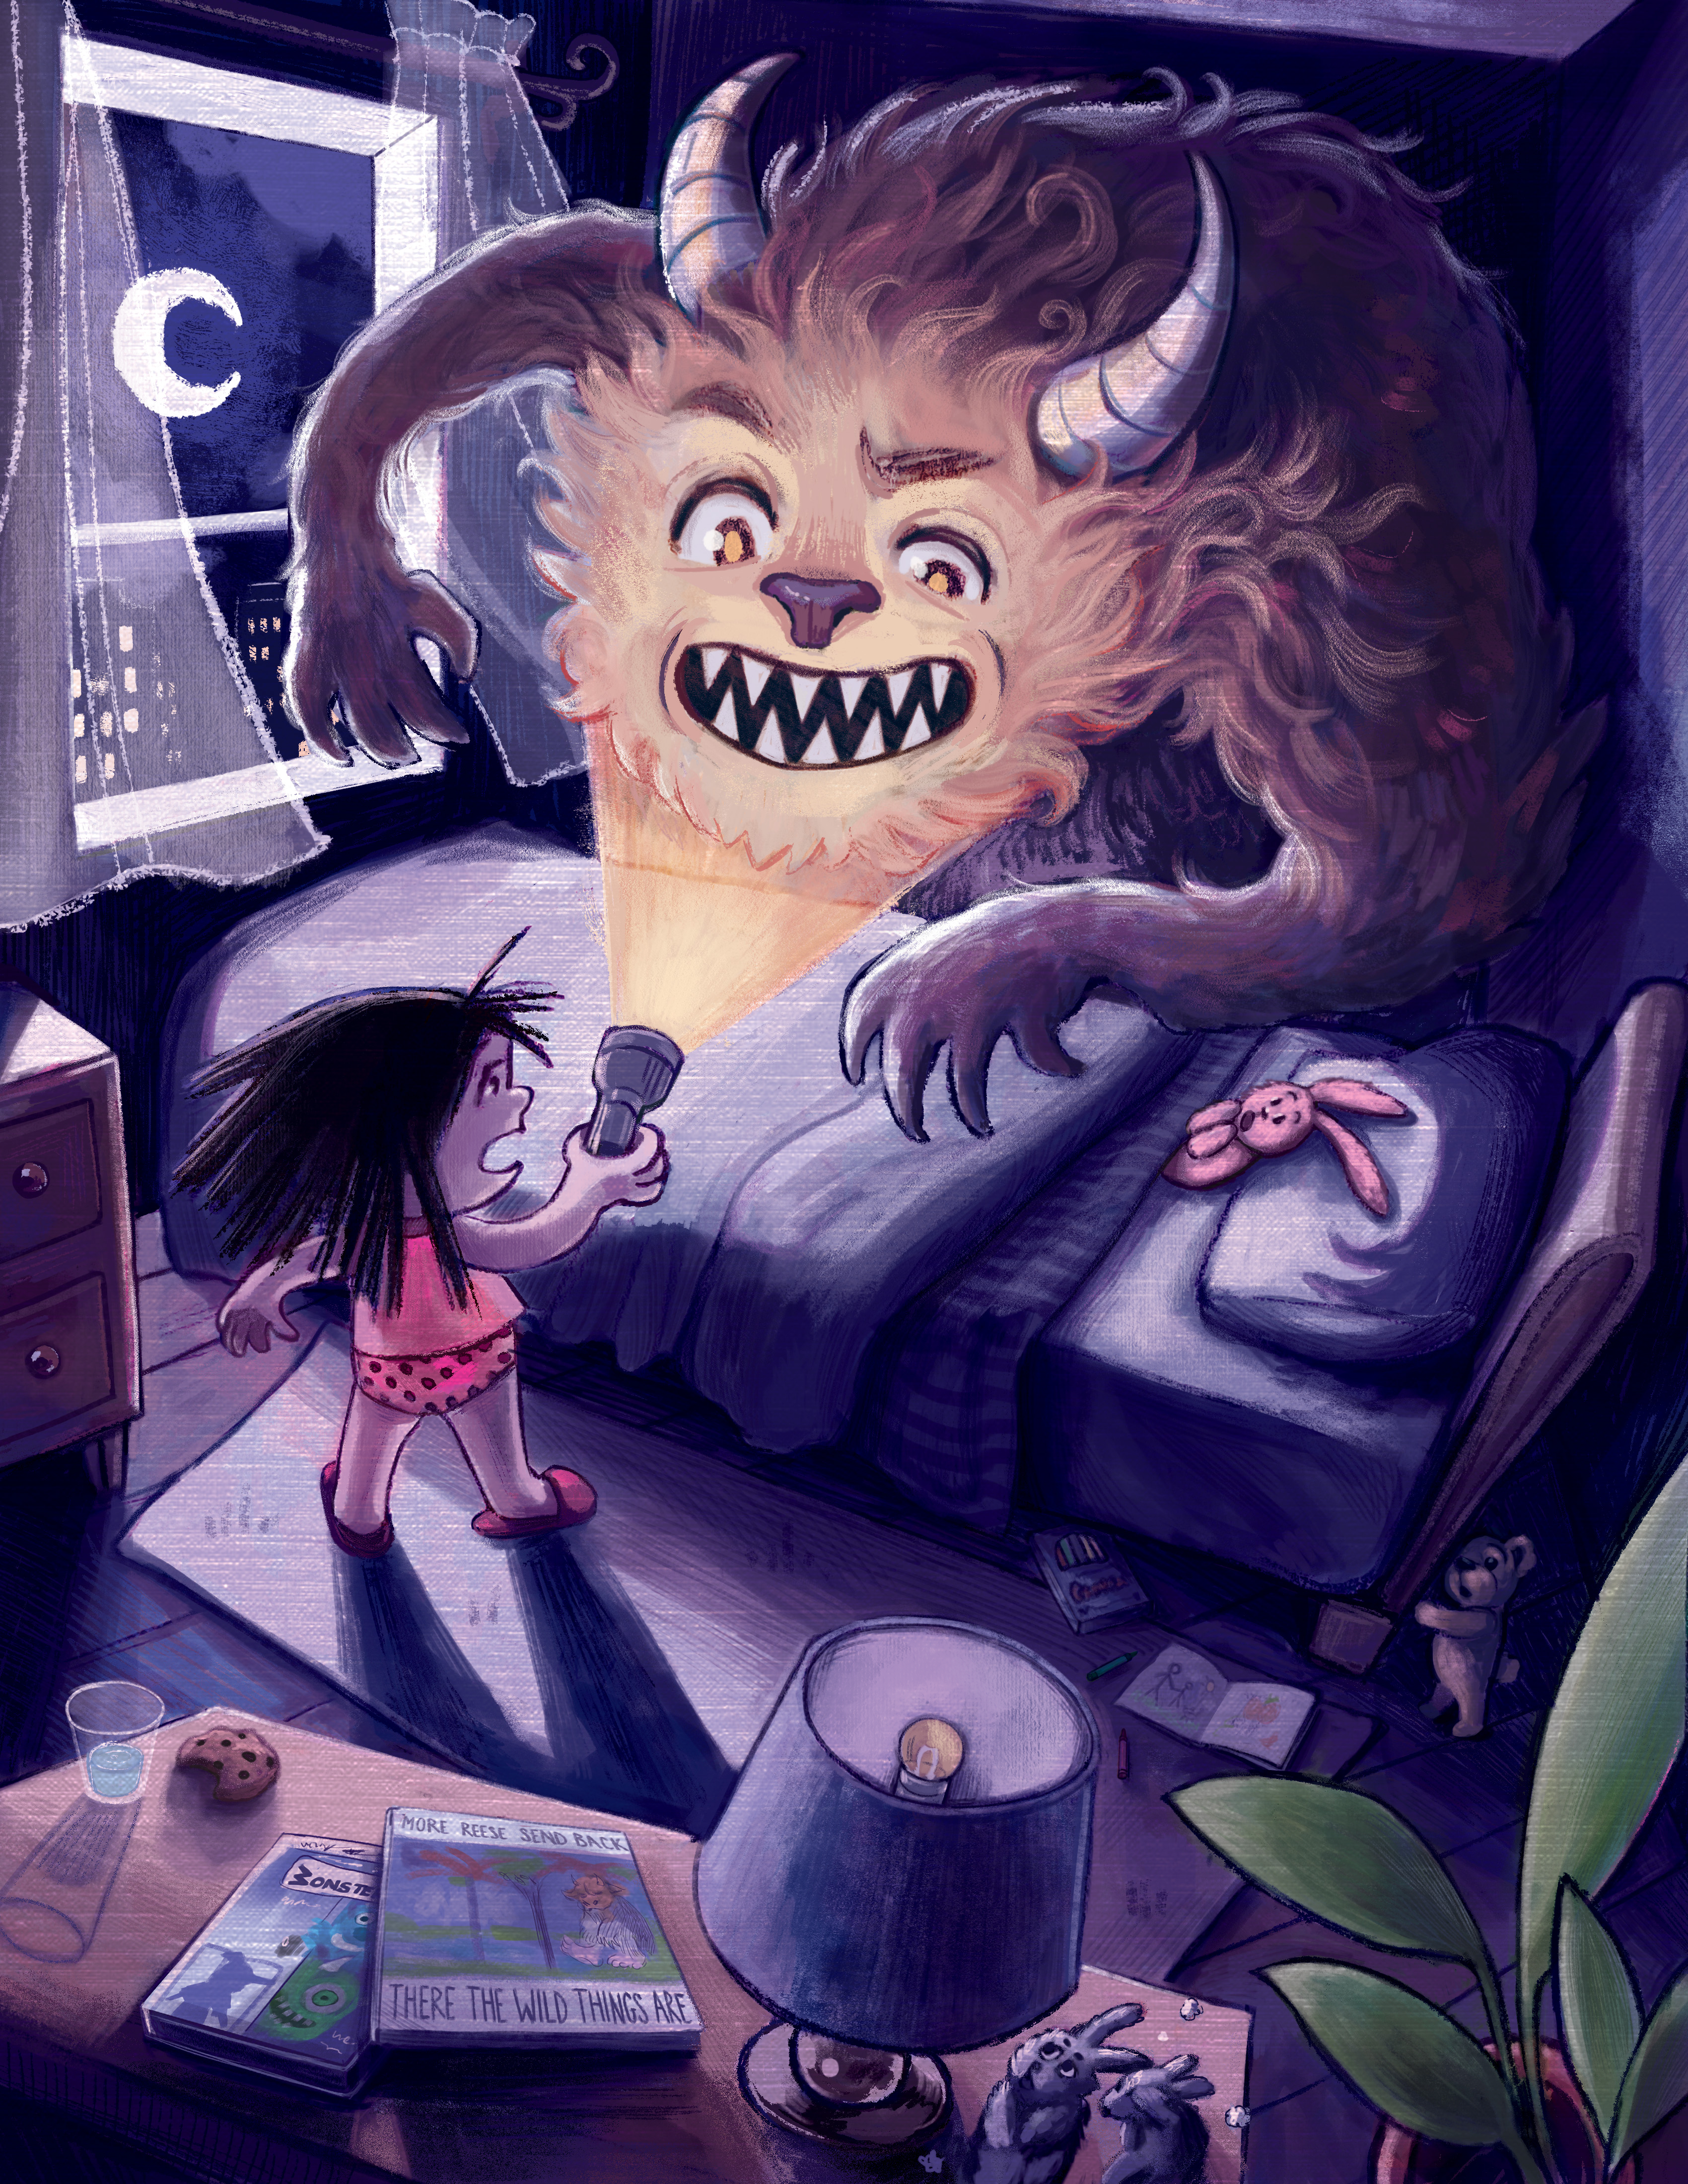 Overactive Imagination, 2022
Digital

Nostalgic childhood nights would often lead to my imagination running wild. A whimsical monster greets a little girl from behind the bed! This illustration features elements of my childhood, including favorite books, movies, special stuffies, dust bunnies, a glass of water in case of nightmares, and of course: an overactive imagination.